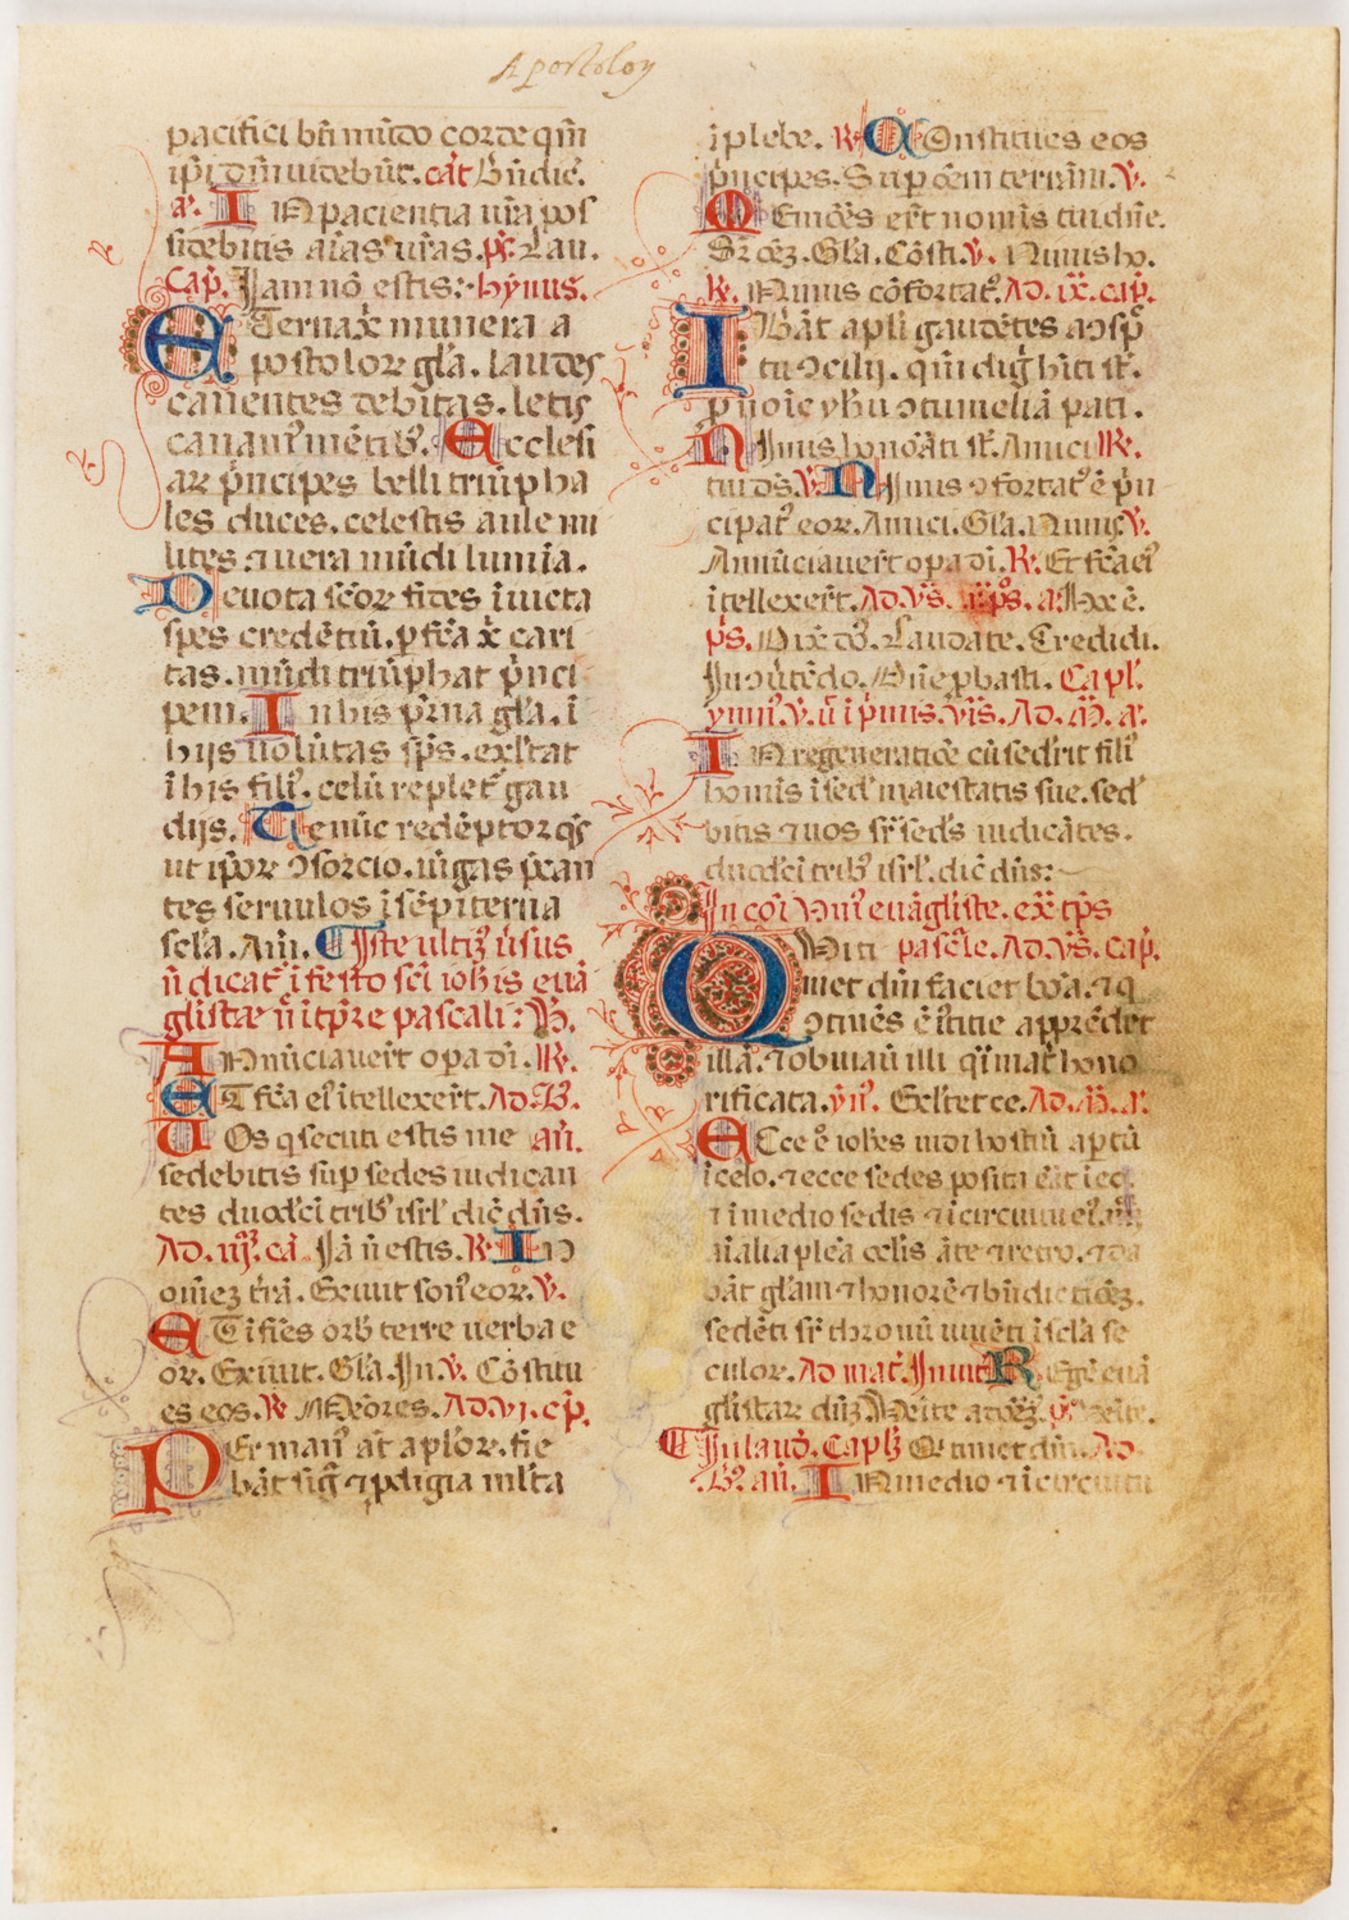 AN ITALIAN BREVIARY LEAF FROM THE COMMON OF SAINTS, 15TH C.